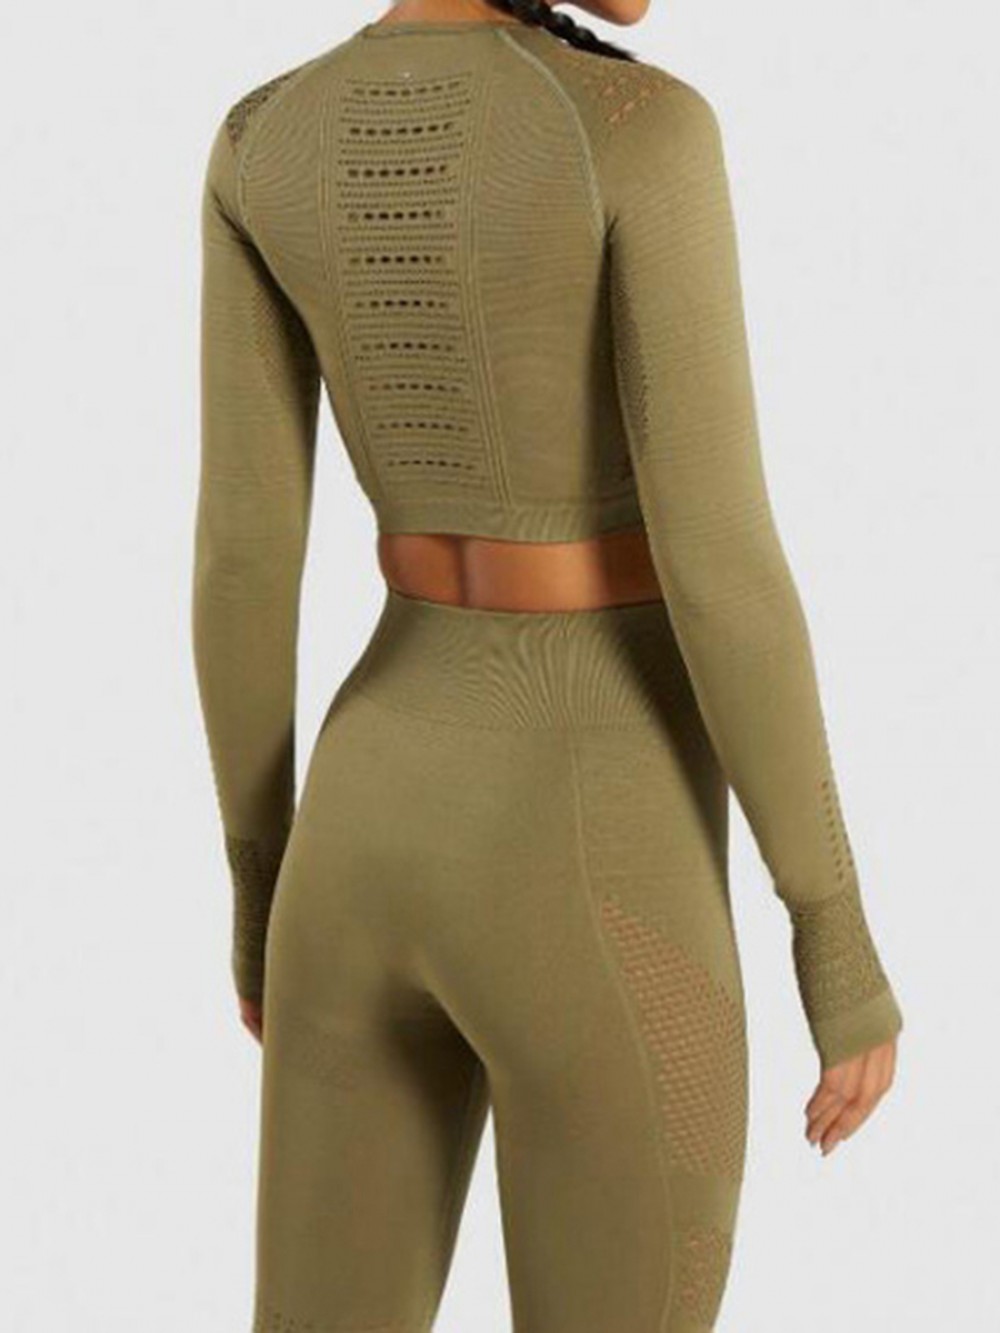 Virtuoso Army Green Hollow Out Sports Suits Full Length Activewear